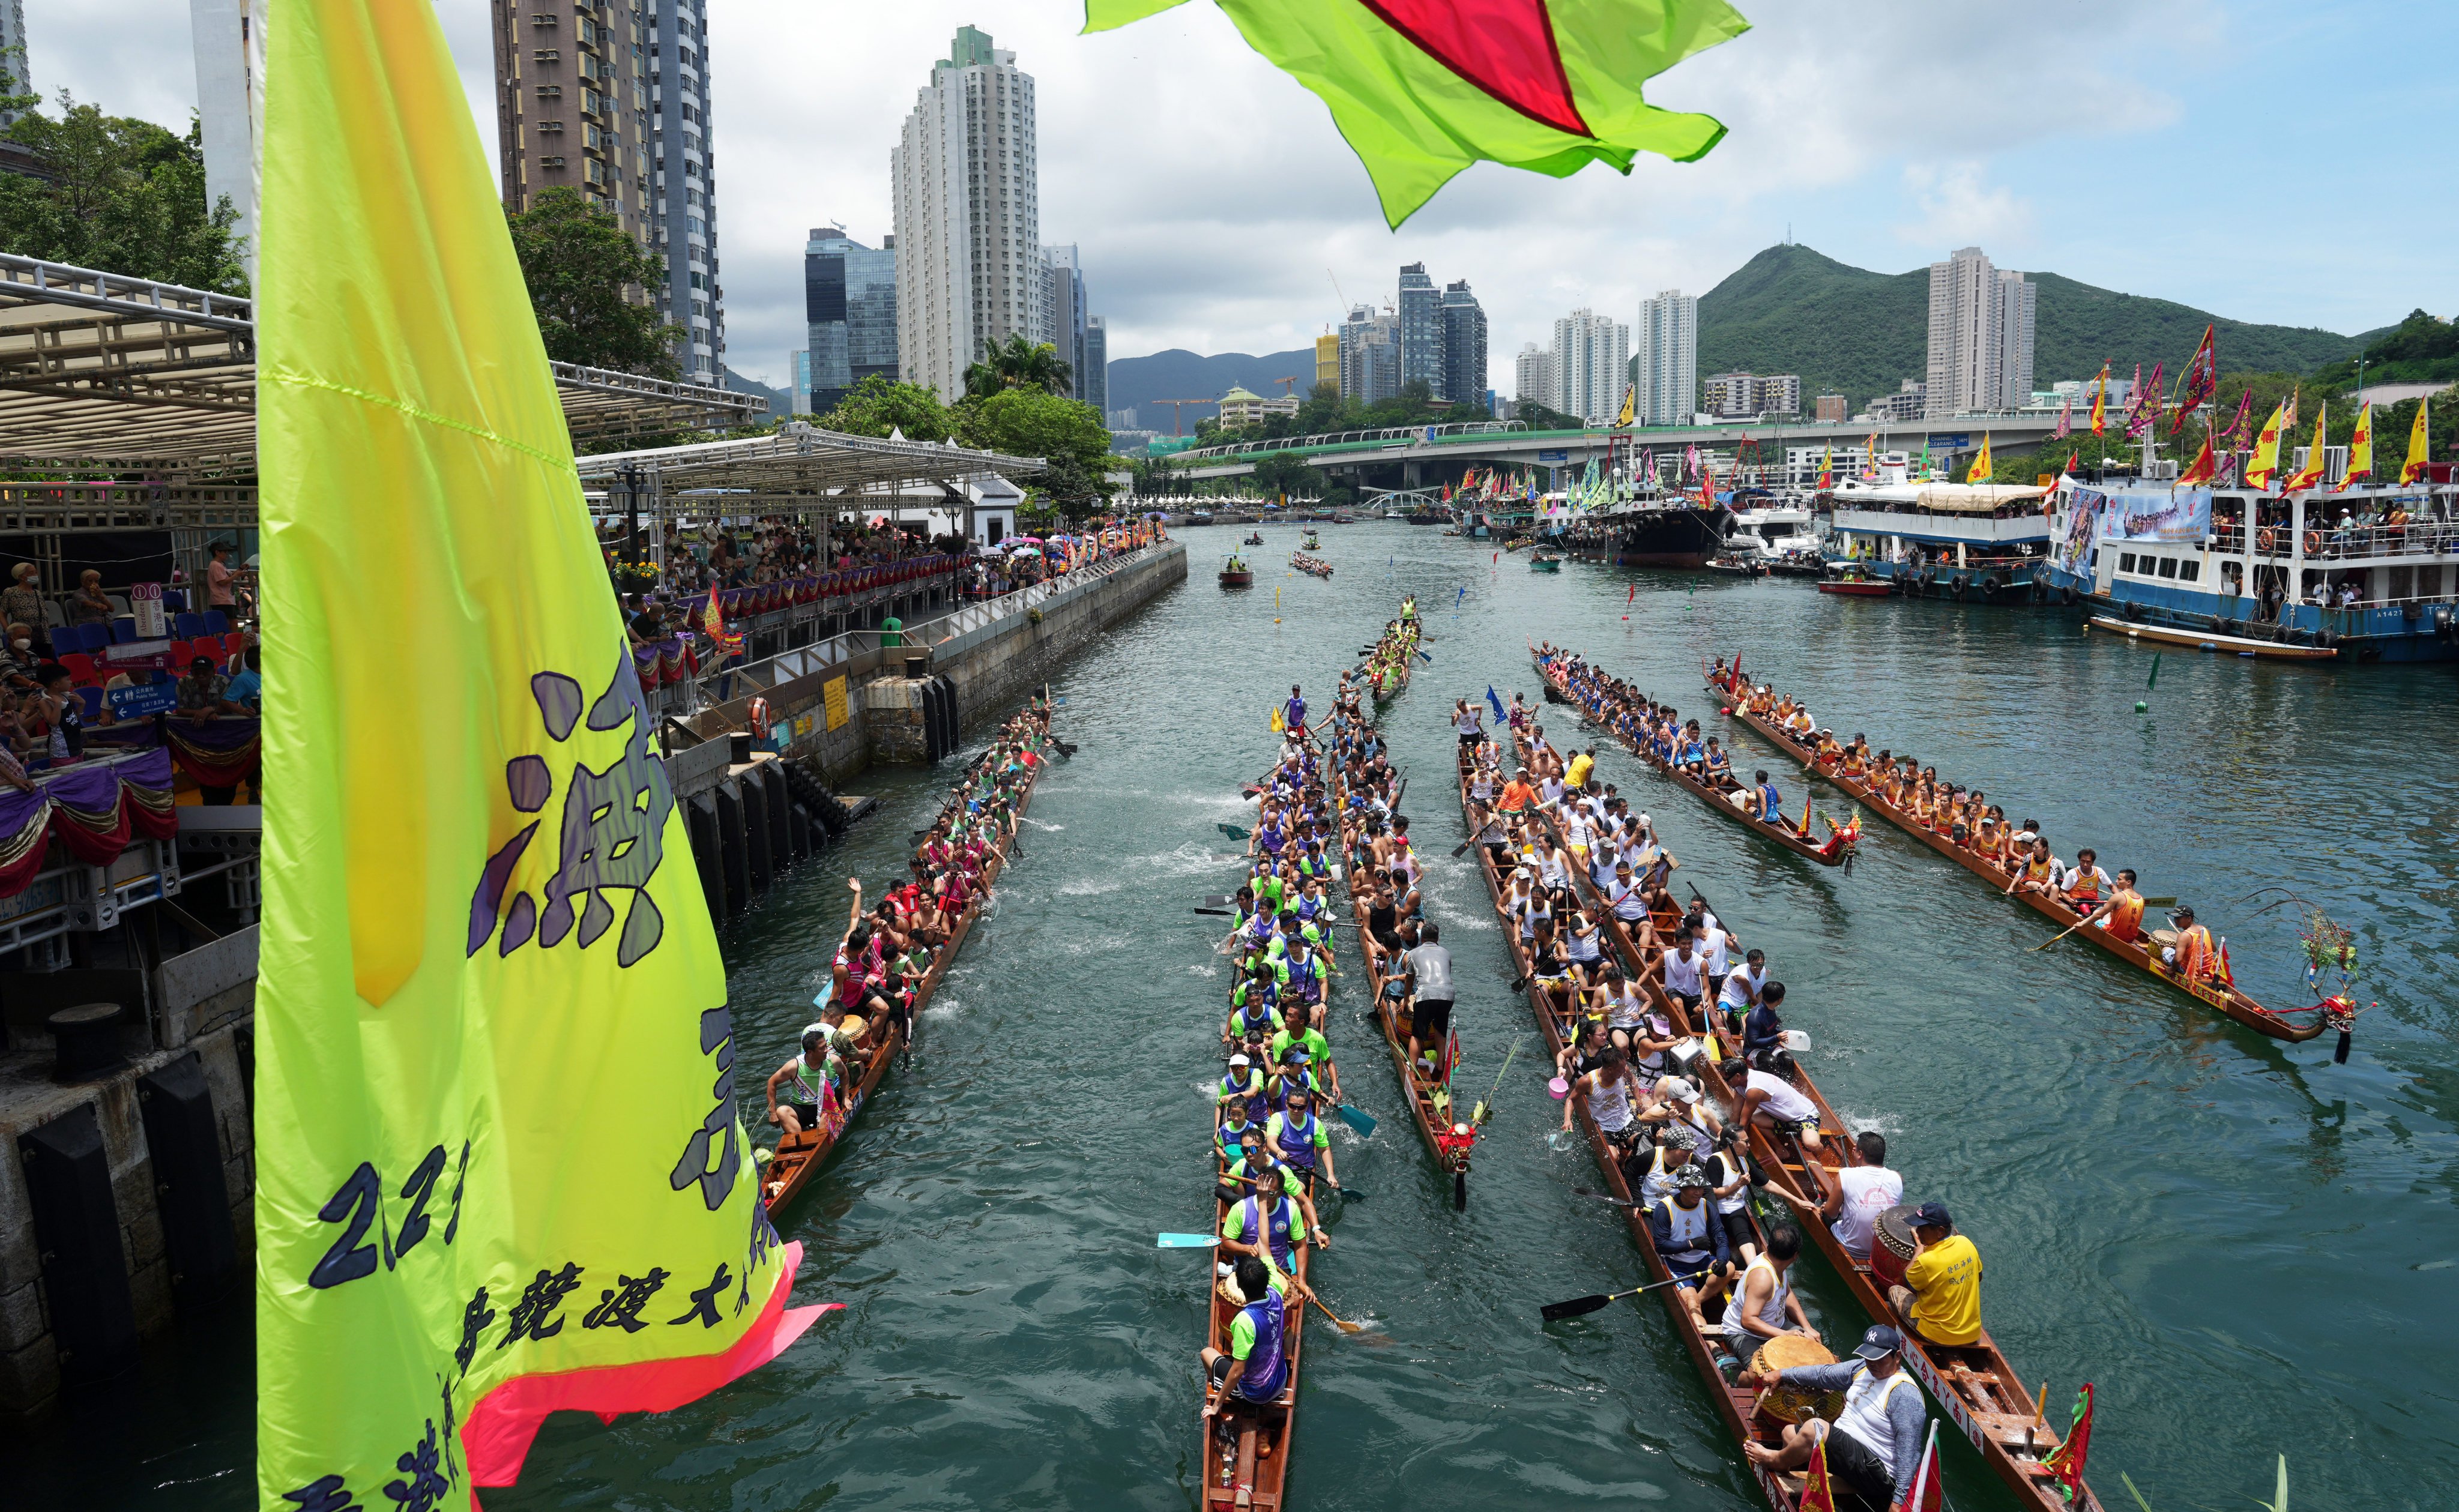 Aberdeen is one of the locations hosting dragon boat races. Photo: Sam Tsang